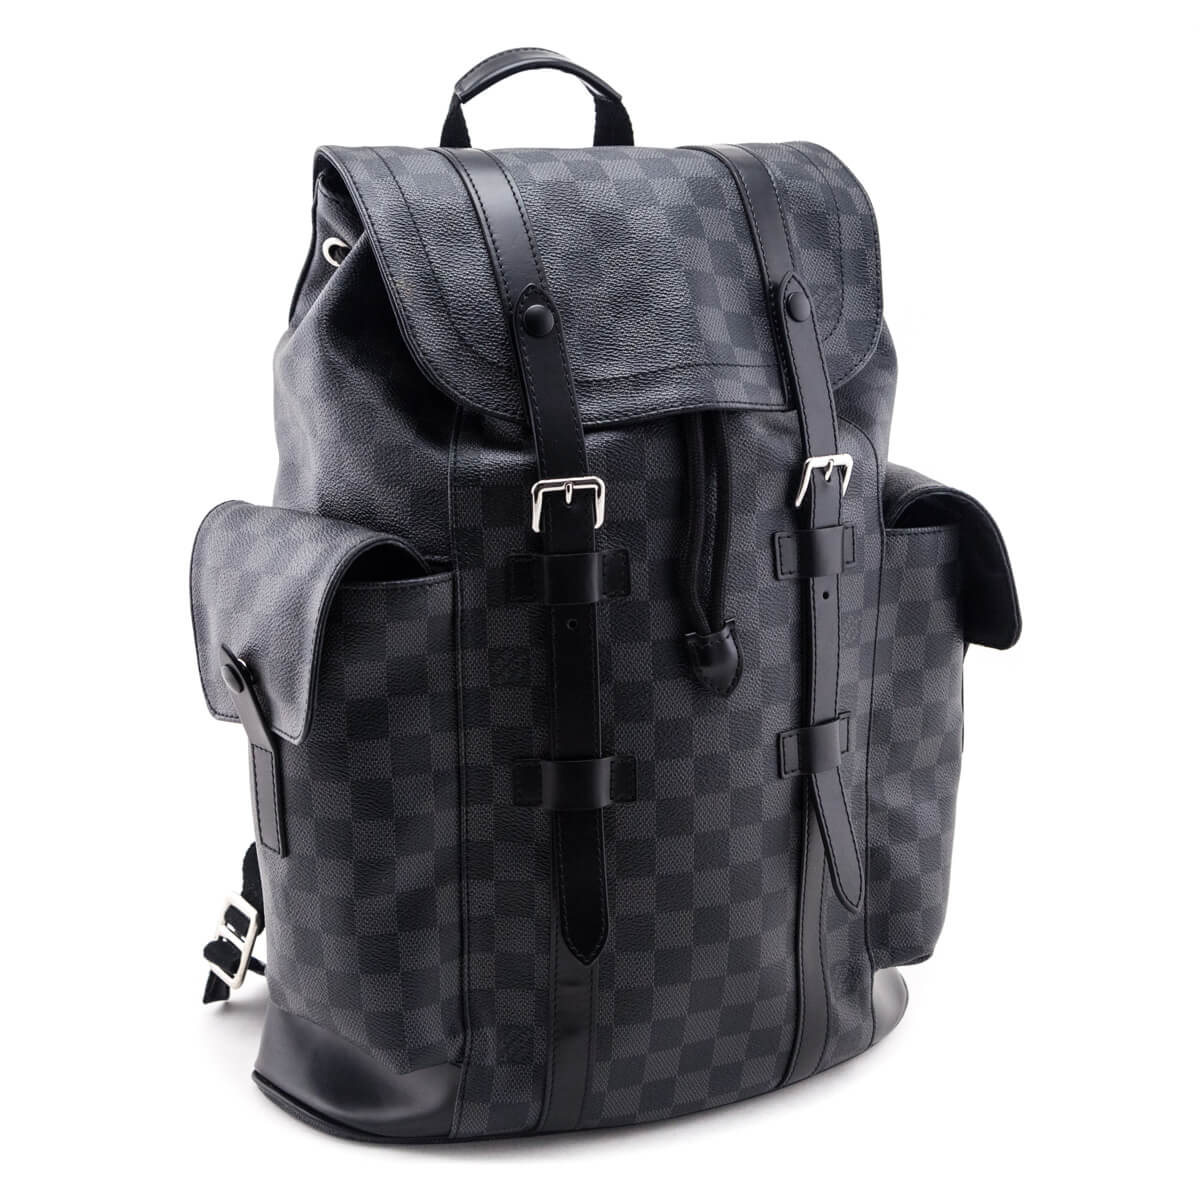 myMANybags: Louis Vuitton Christopher PM Backpack